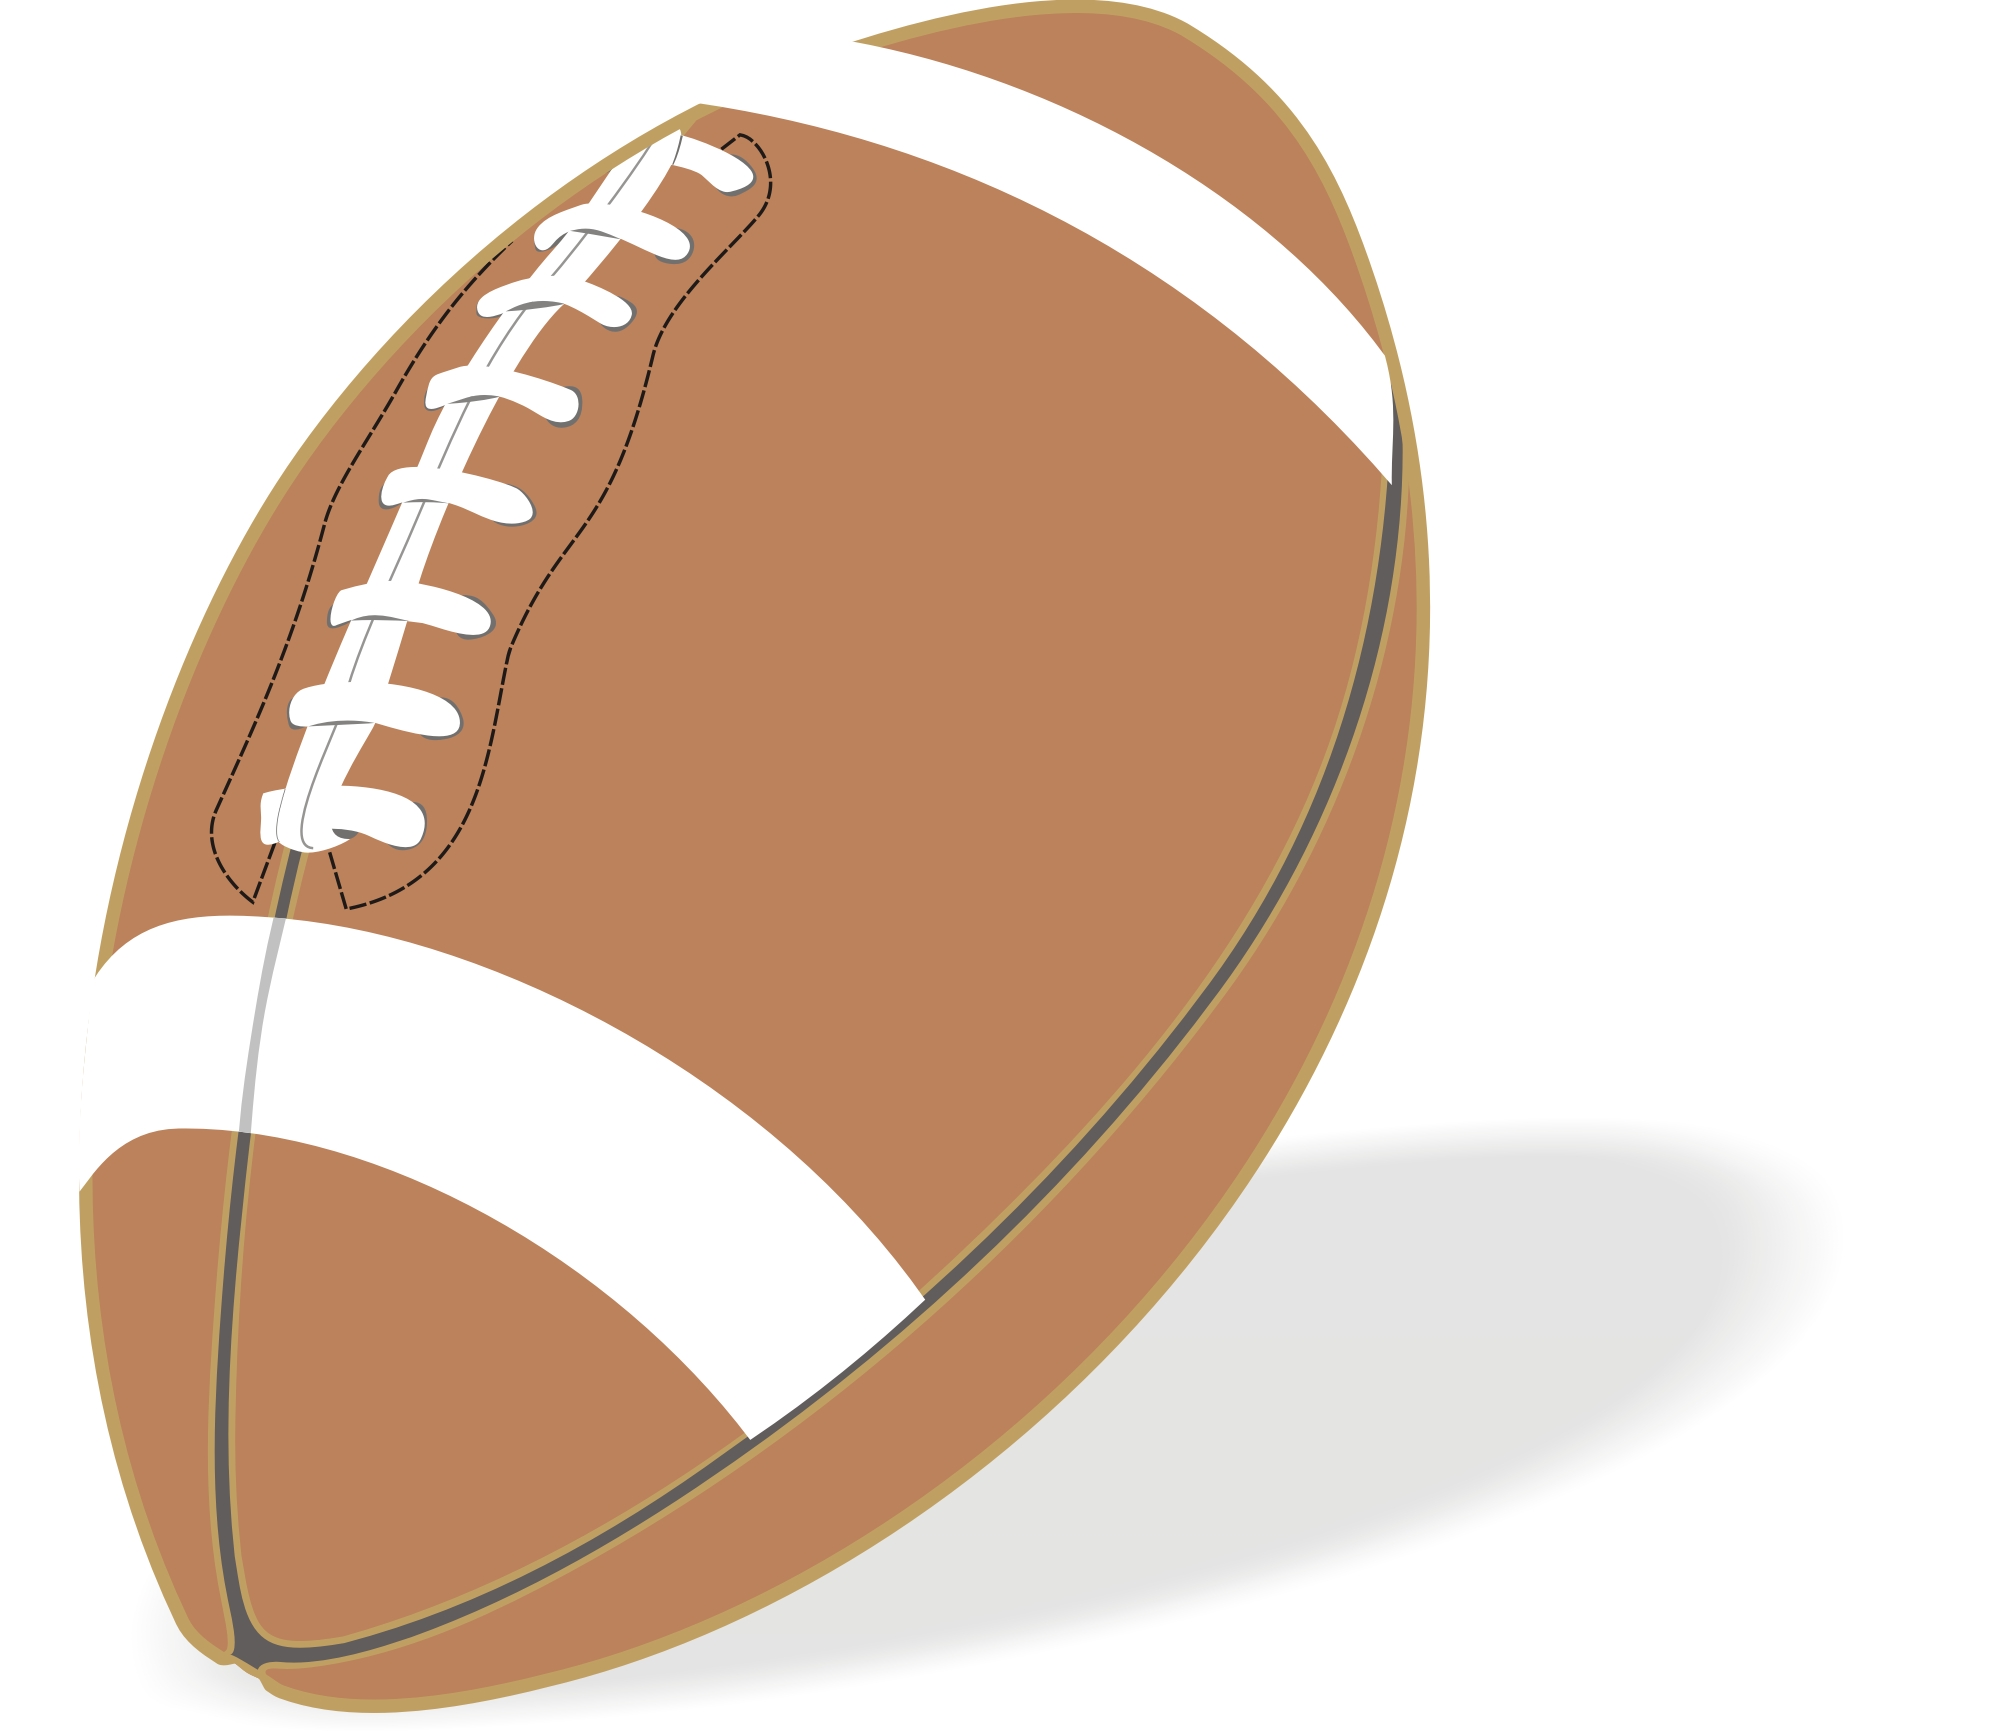 football clipart free download - photo #22